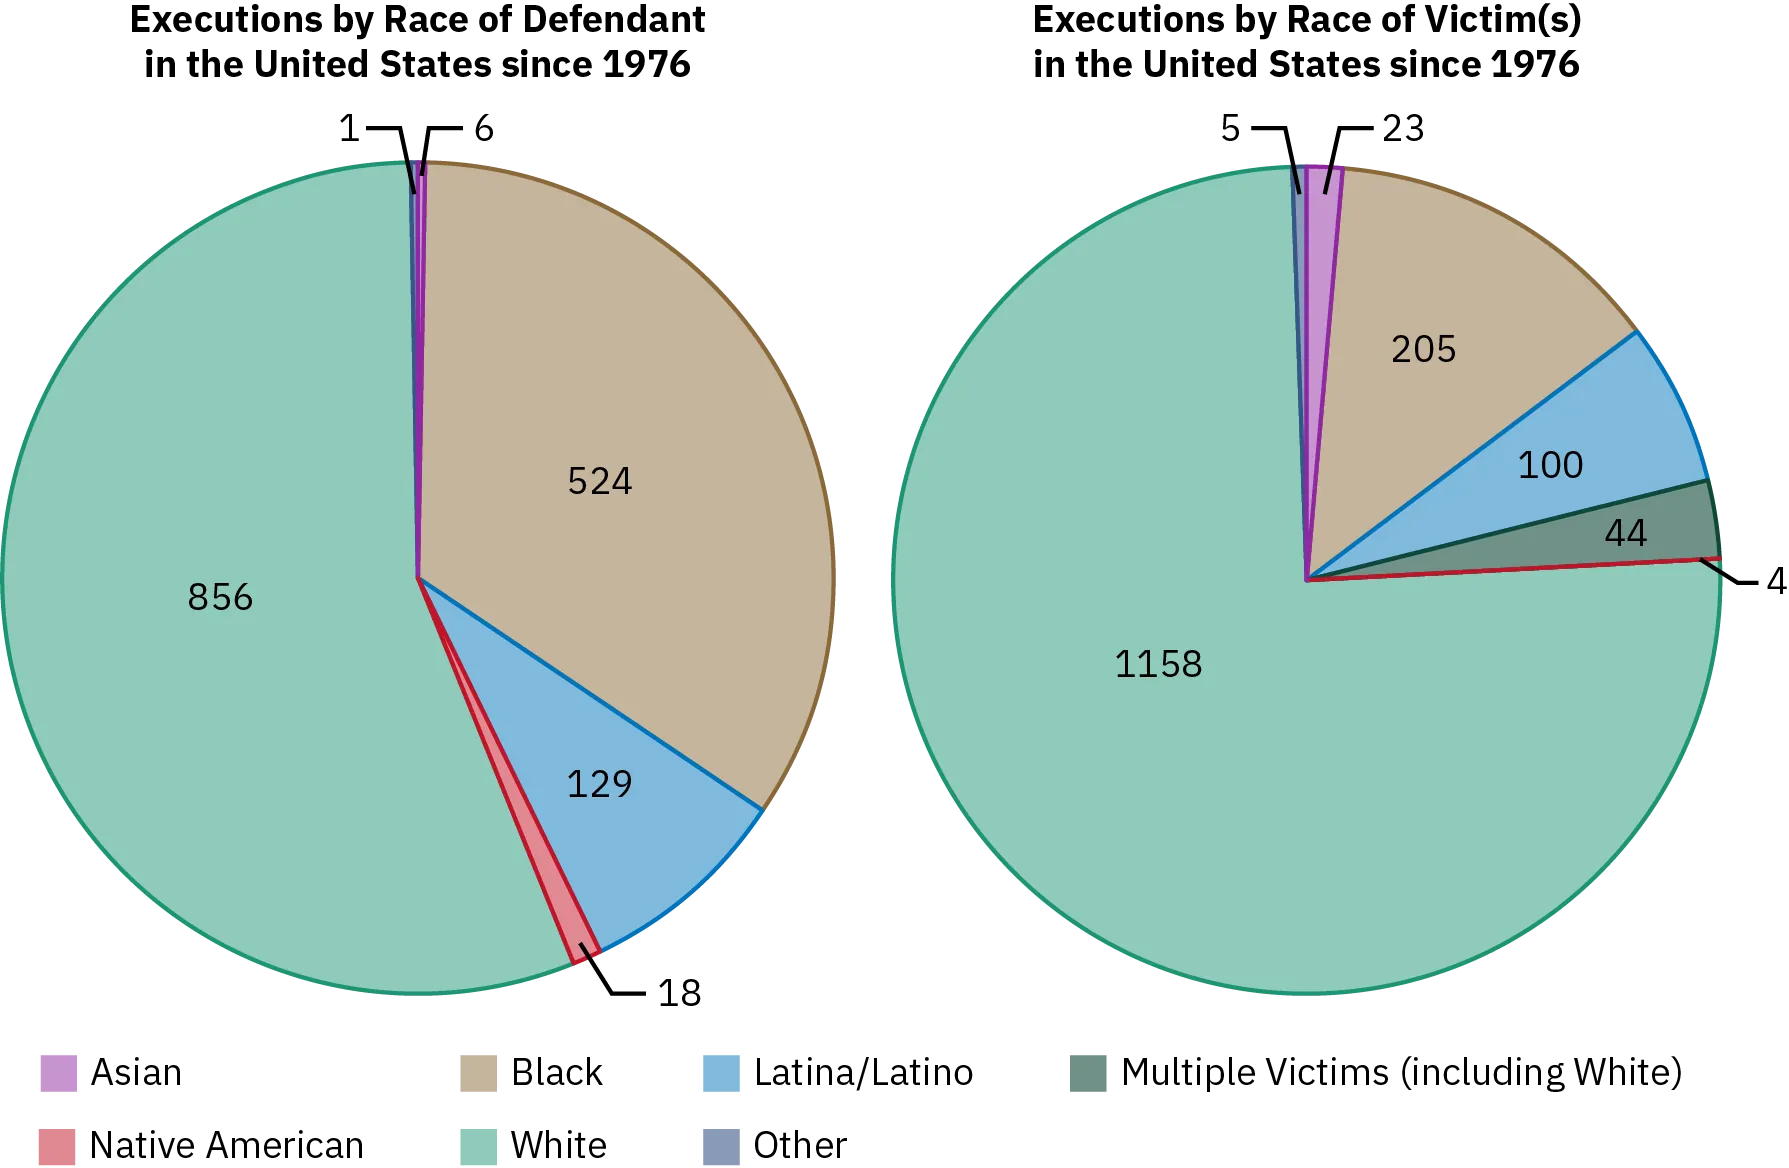 Two pie charts show how race relates to the death penalty in the United States since 1976. The pie chart on the left shows executions by race of the defendant in the United States since 1976: 856 defendants were White, 129 defendants were Latina/Latino, 524 defendants were Black, and 25 defendants were other races. The second pie chart shows executions by race of the victims in the United States since 1976: 1,158 victims were White, 100 victims were Latina/Latino, 205 victims were Black, and 76 victims were other races.